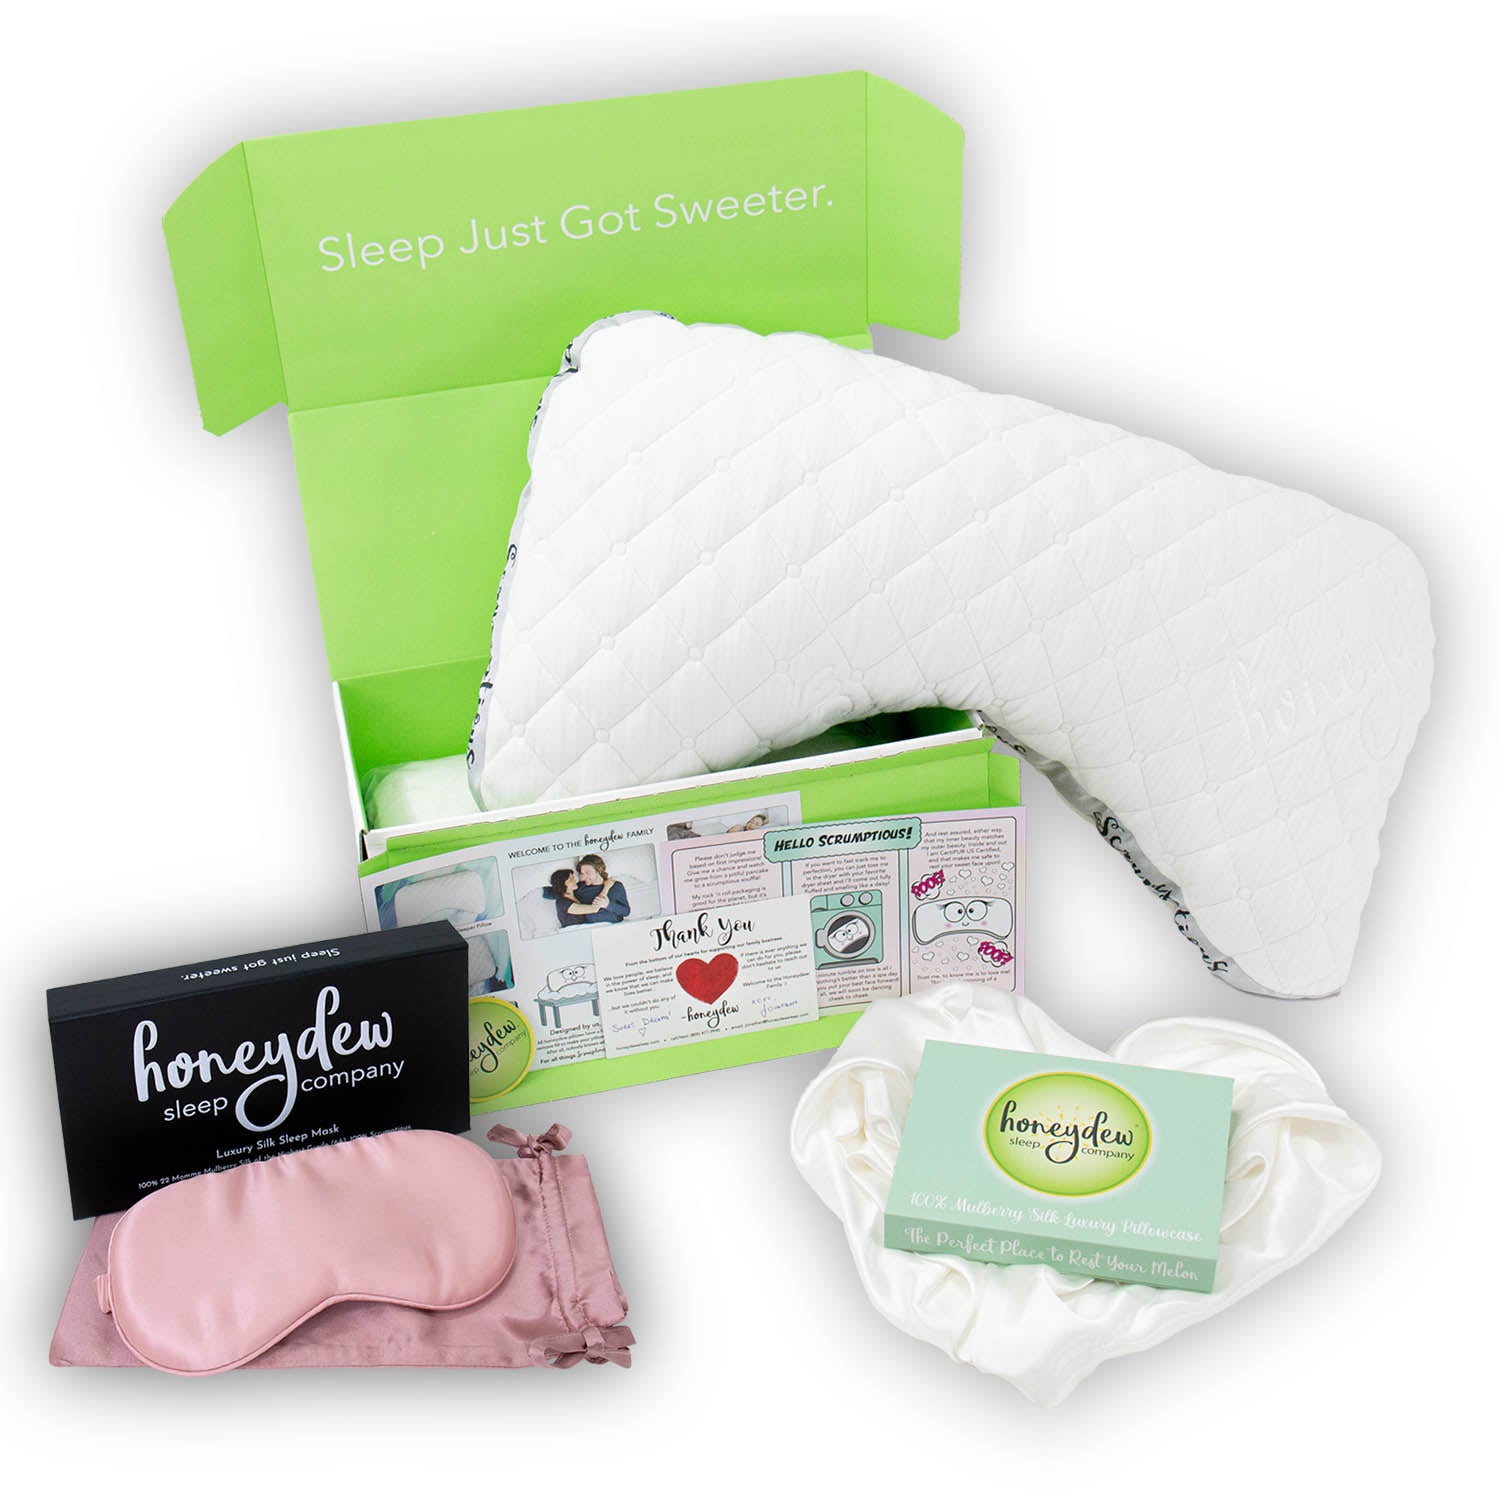 The Forever Young Beauty Box by Honeydew Sleep